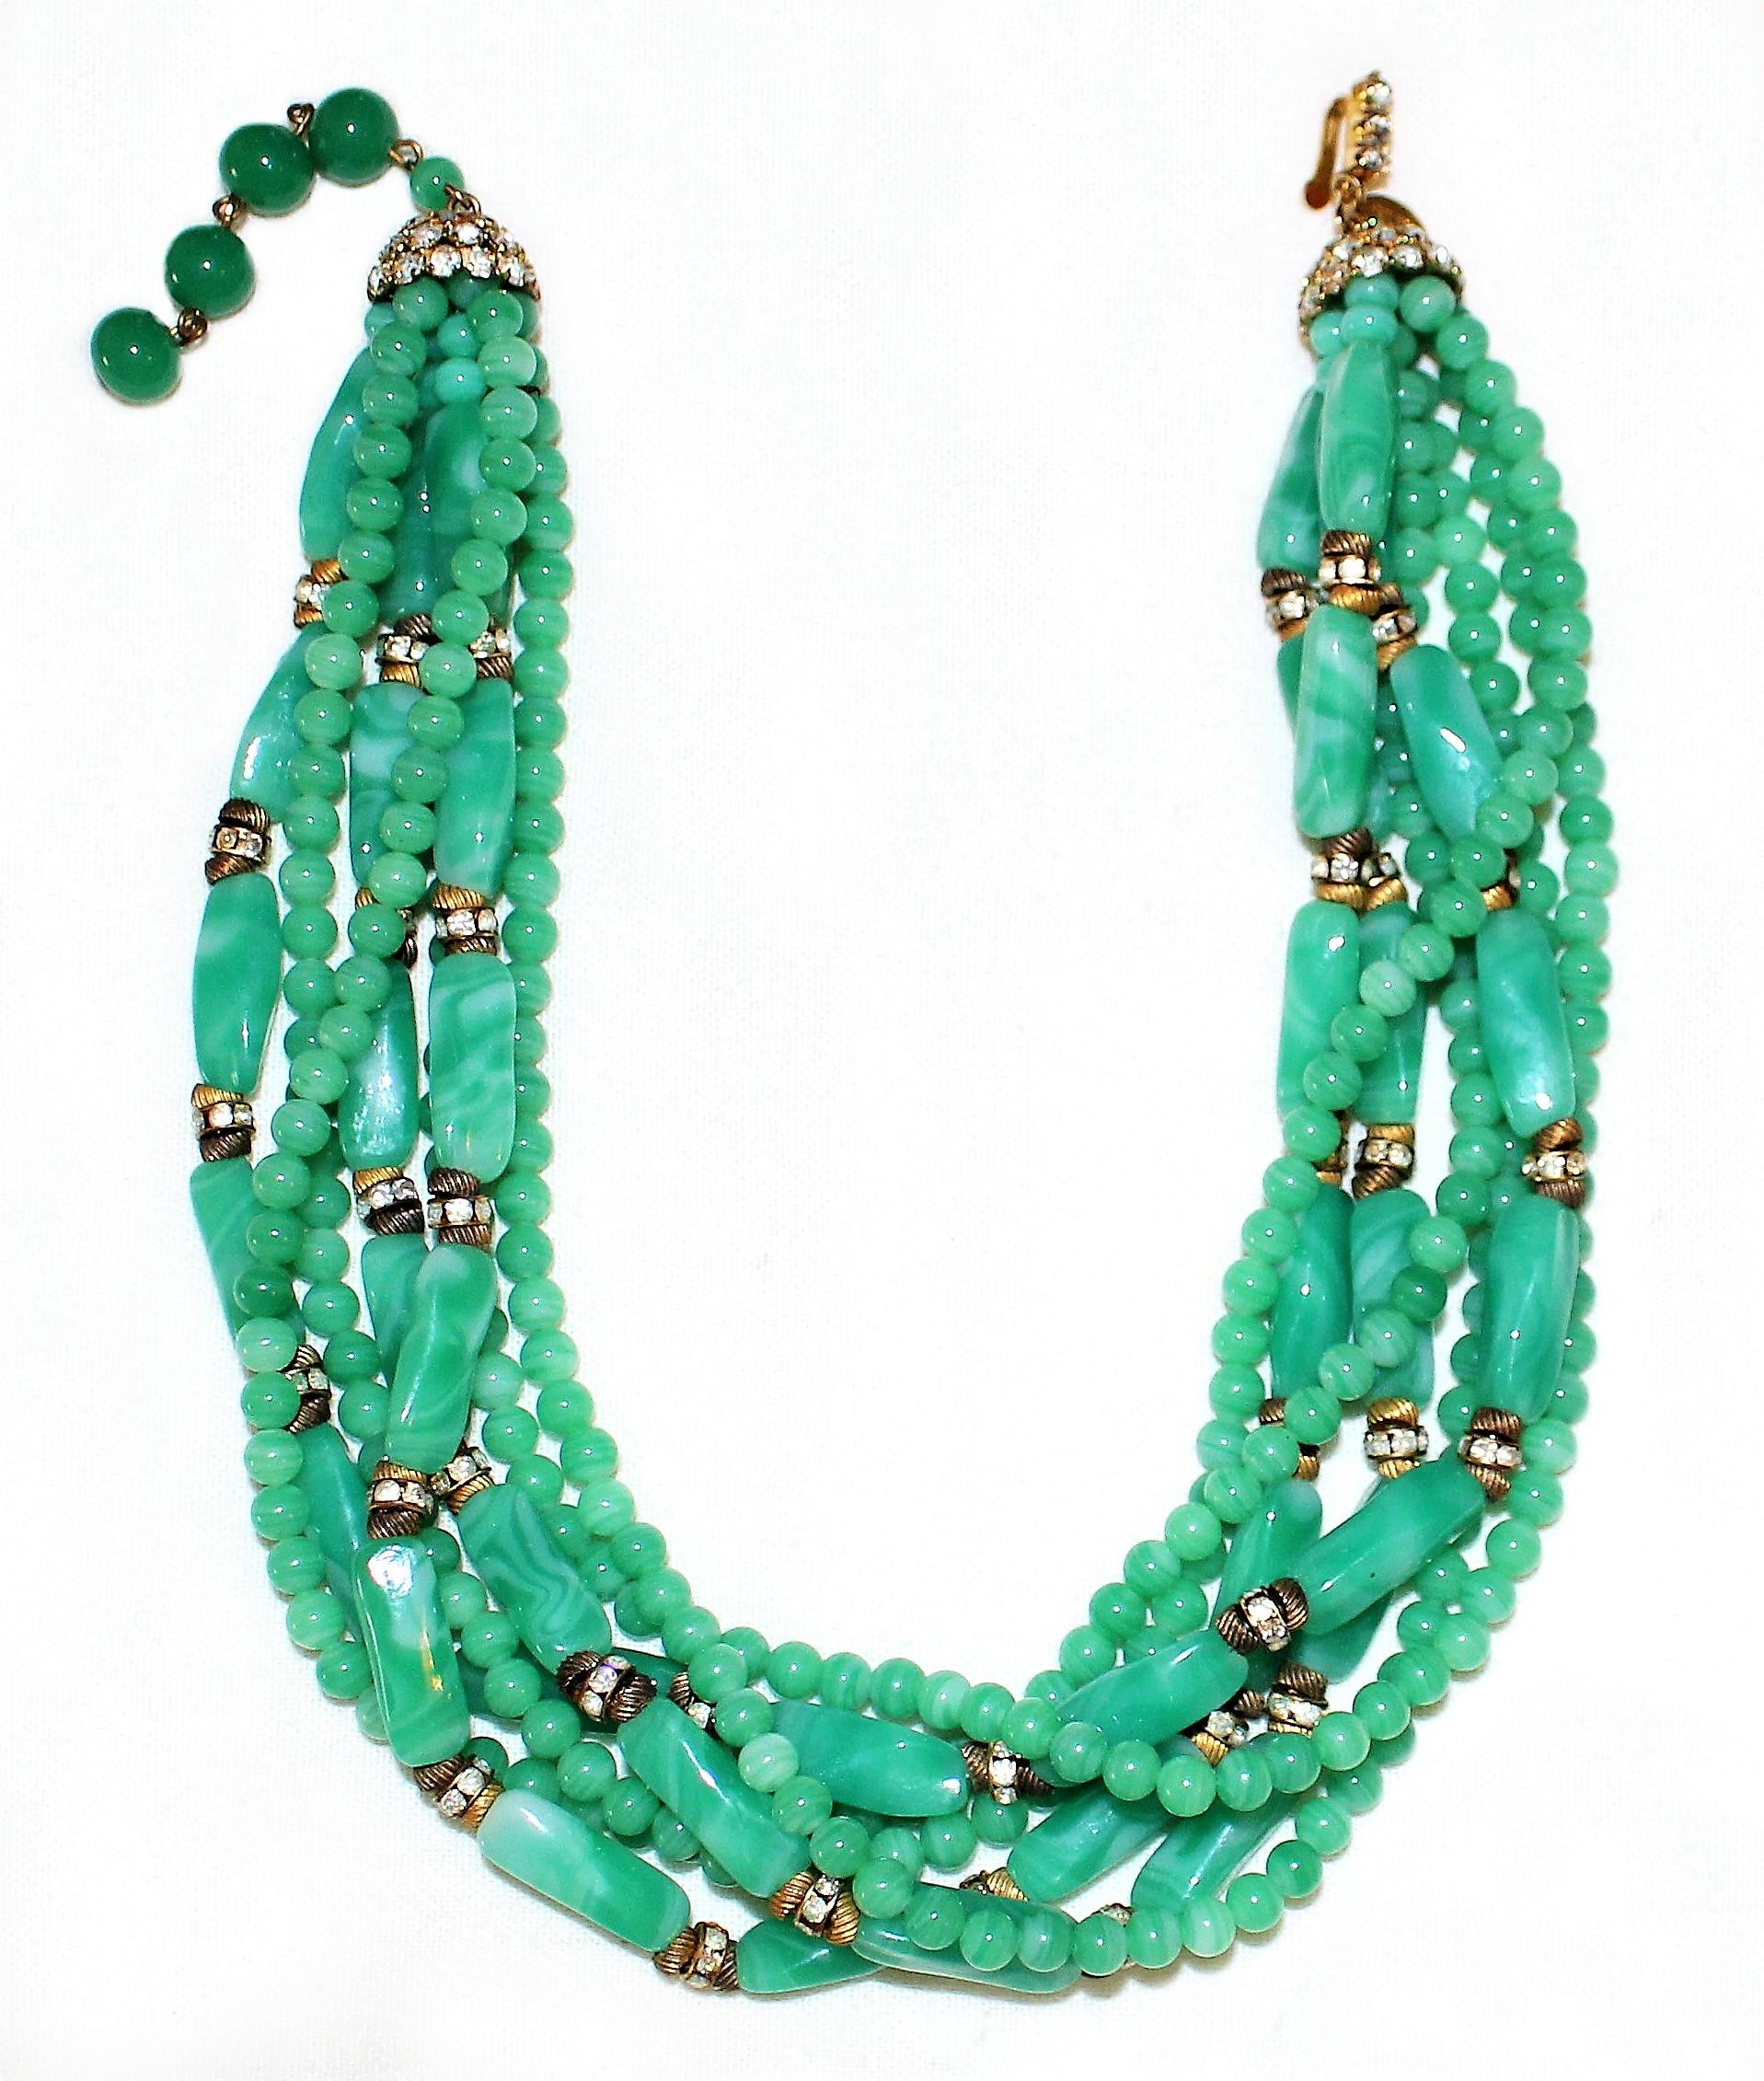 Circa 1960s William deLillo multi-strand, green glass bead necklace embellished with clear rhinestone roundels and gold tone spacers. All the strands are held together at each end with prong-set rhinestone caps. The length of the necklace ranges